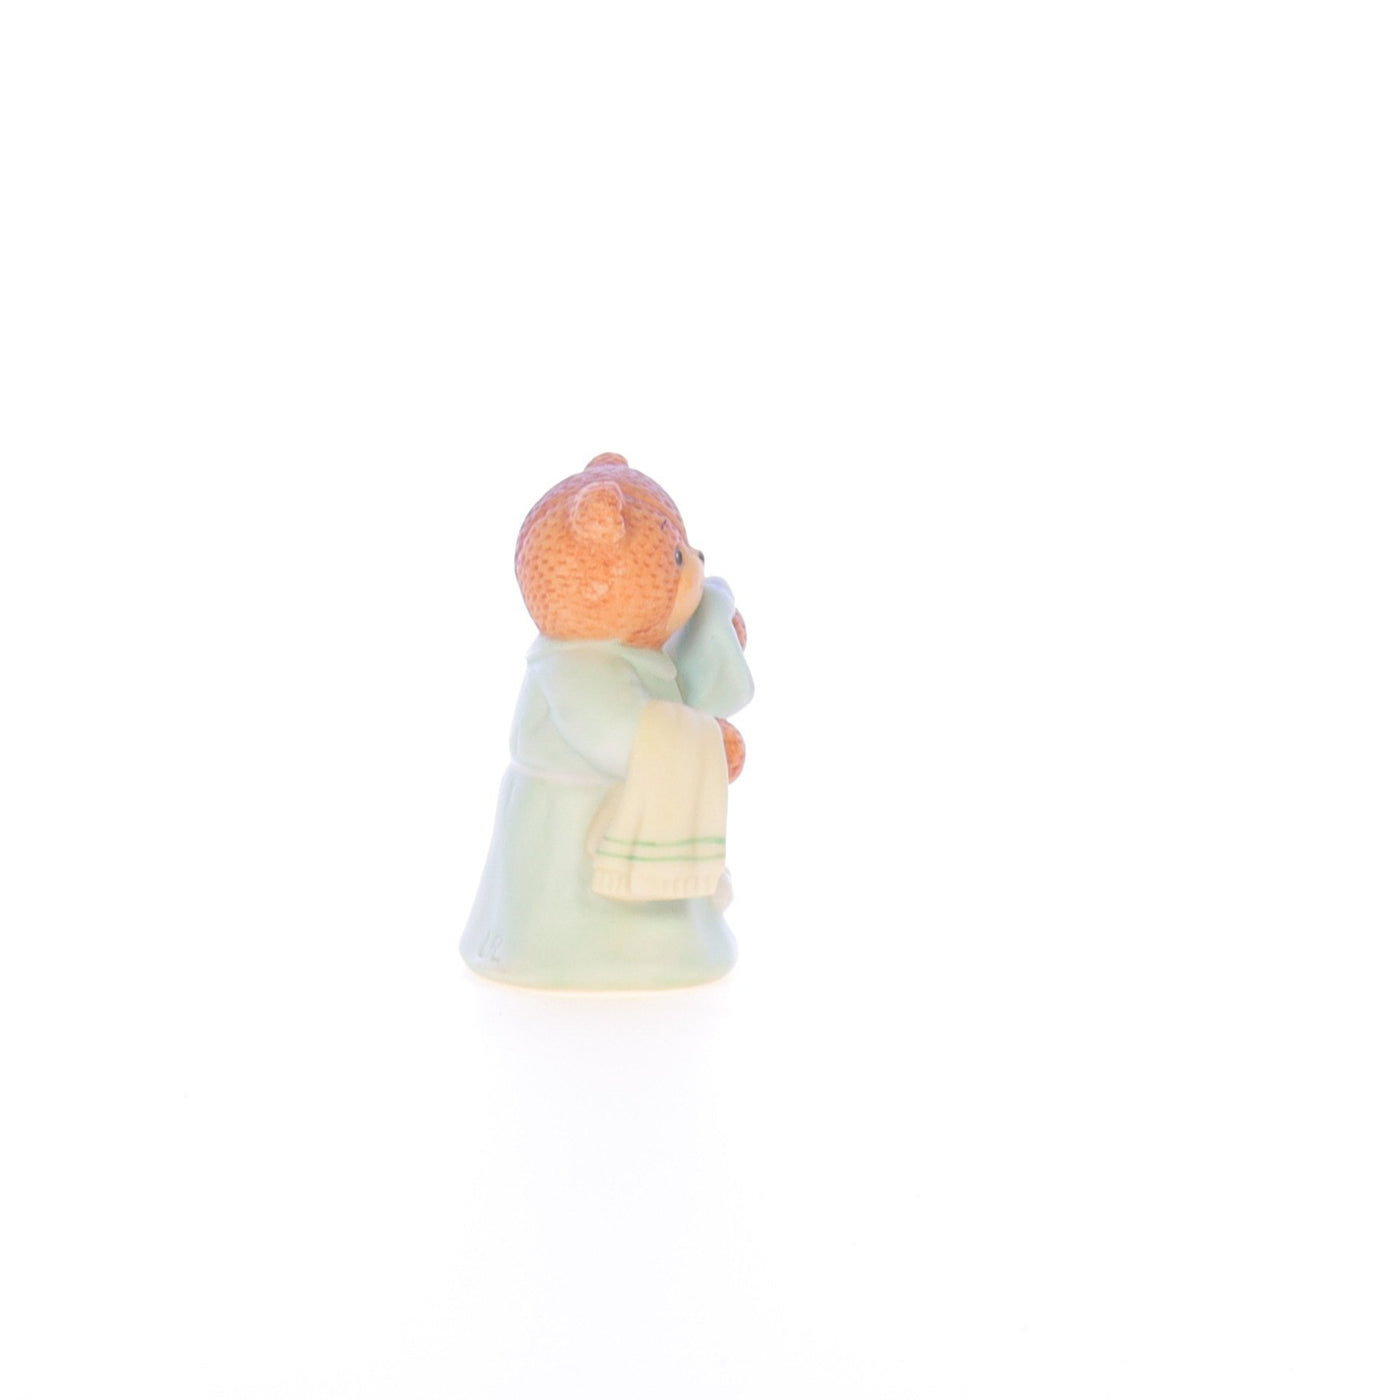 Lucy_And_Me_by_Lucy_Atwell_Porcelain_Figurine_Bear_with_Bath_Robe_Lucy_Unknown_010_07